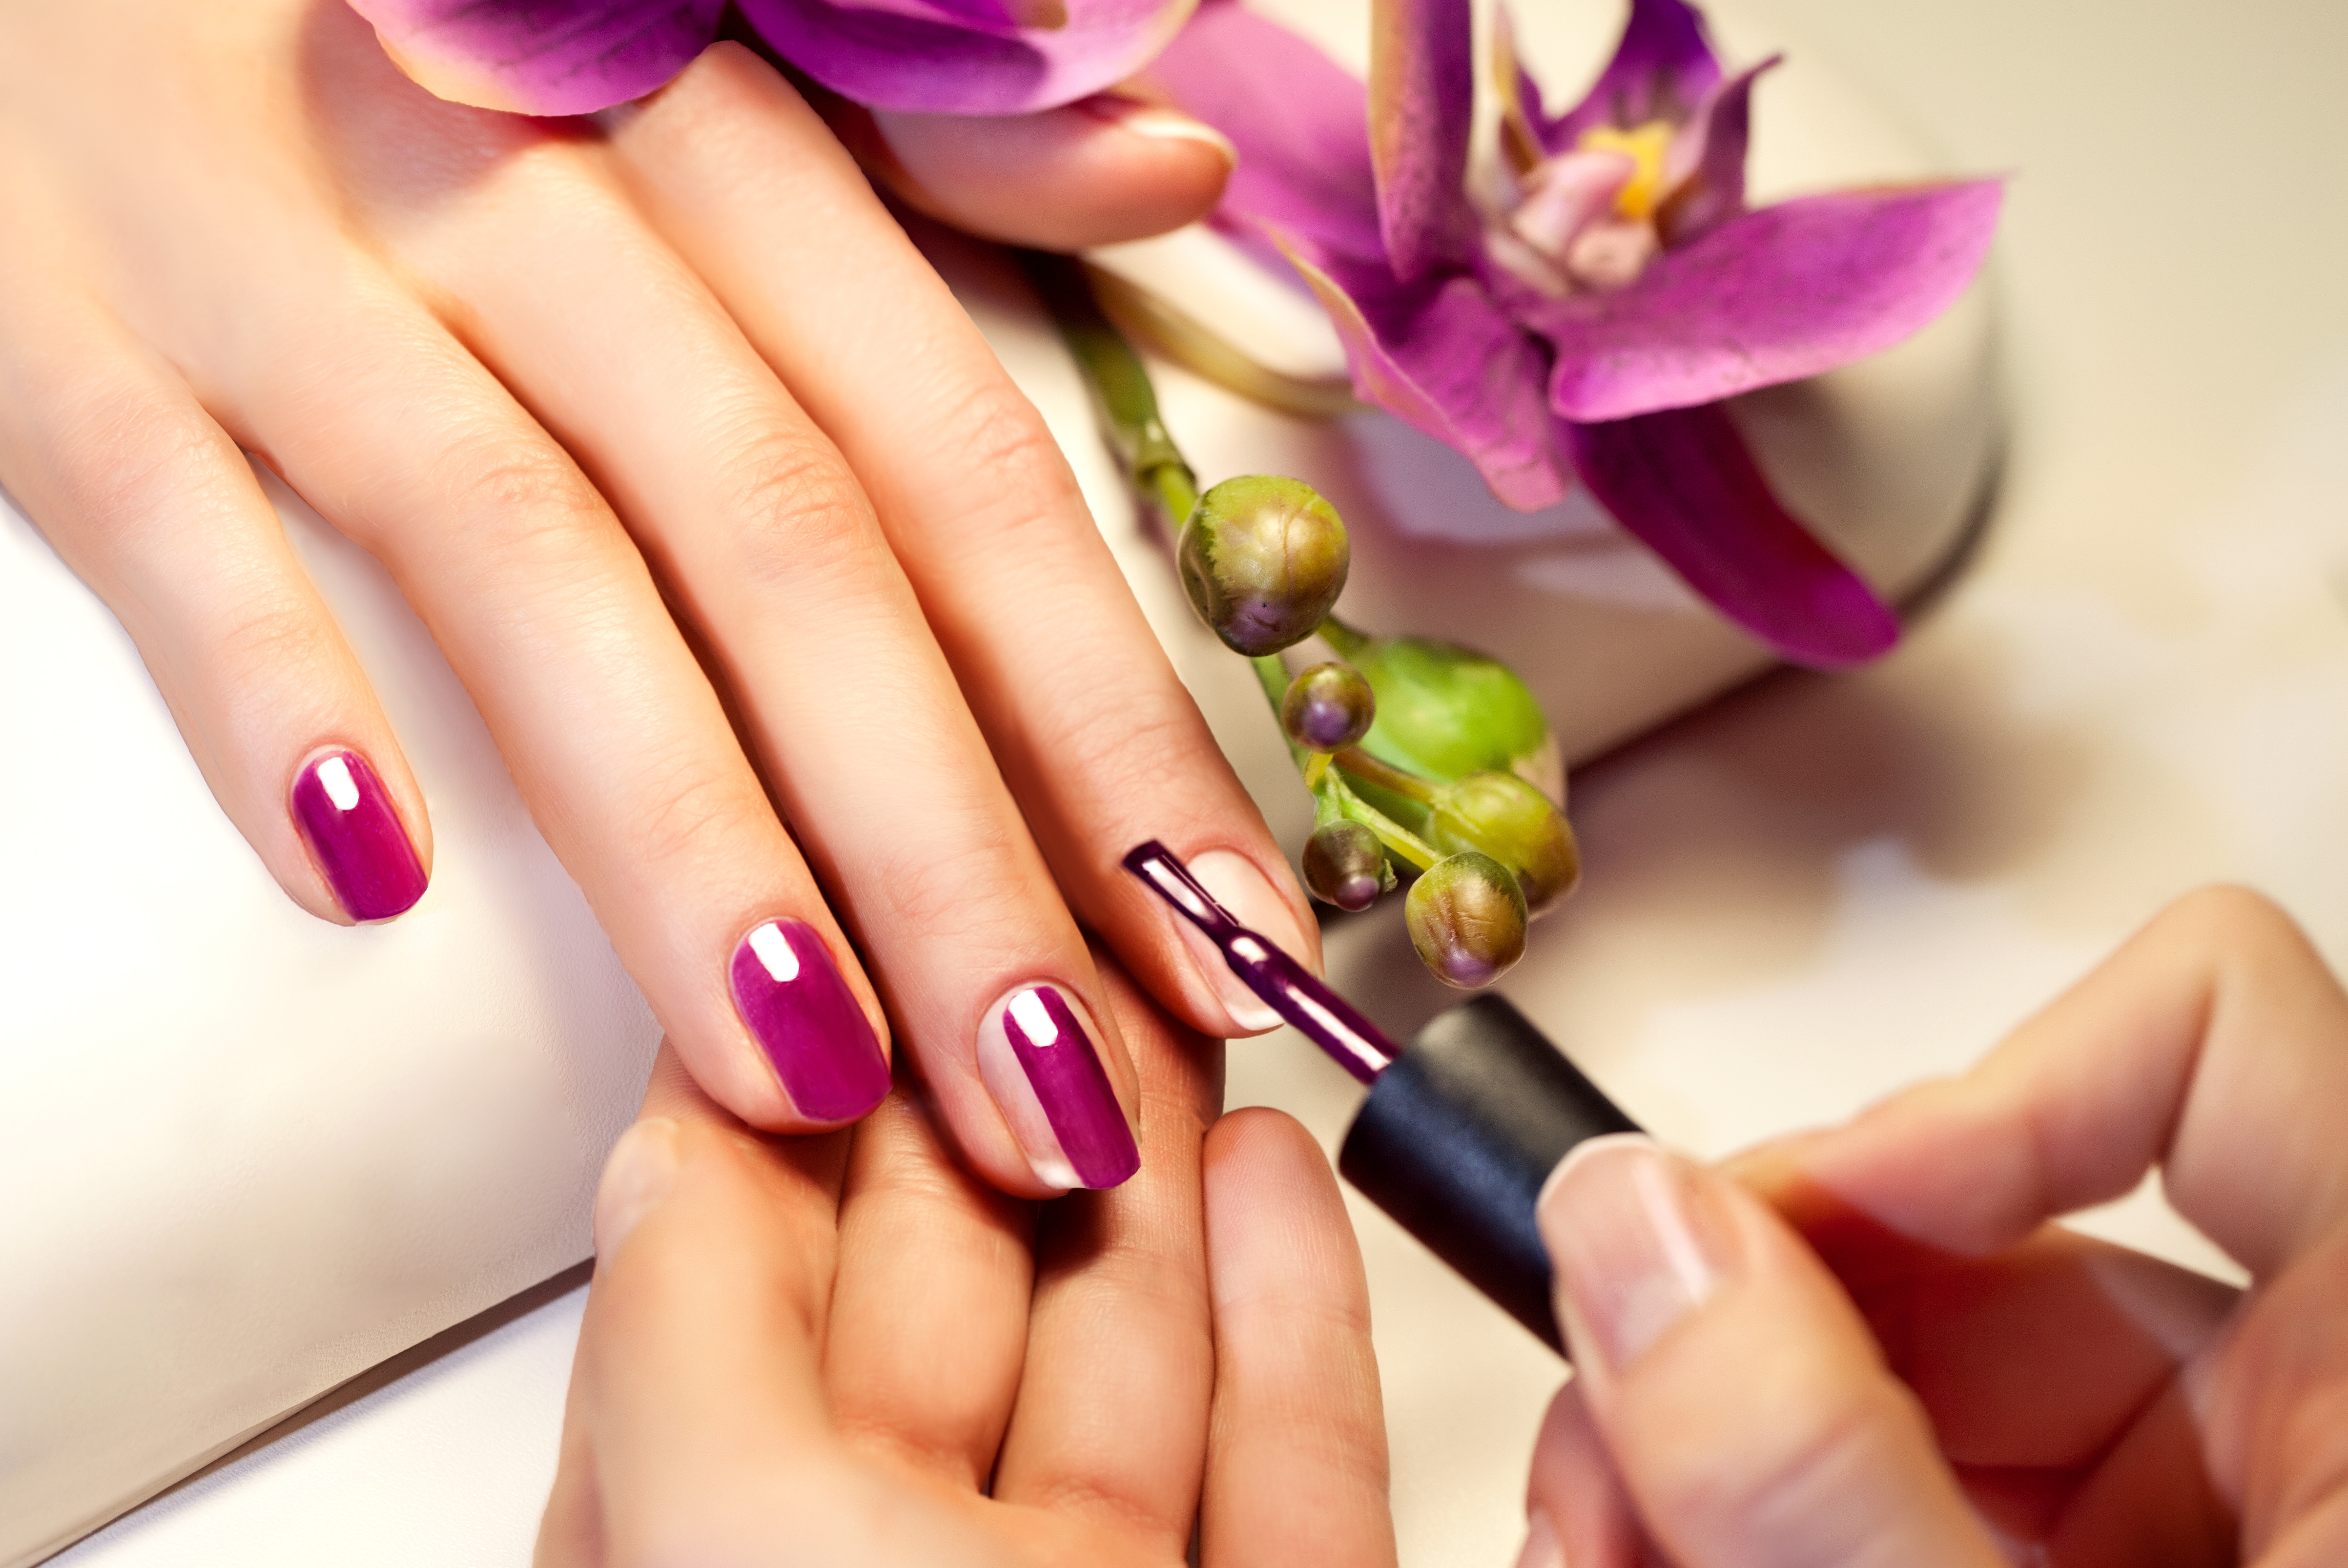 NAIL PARLOR BUSINESS IN KENYA: HOW TO START SMALL AND BUILD YOUR BEAUTY